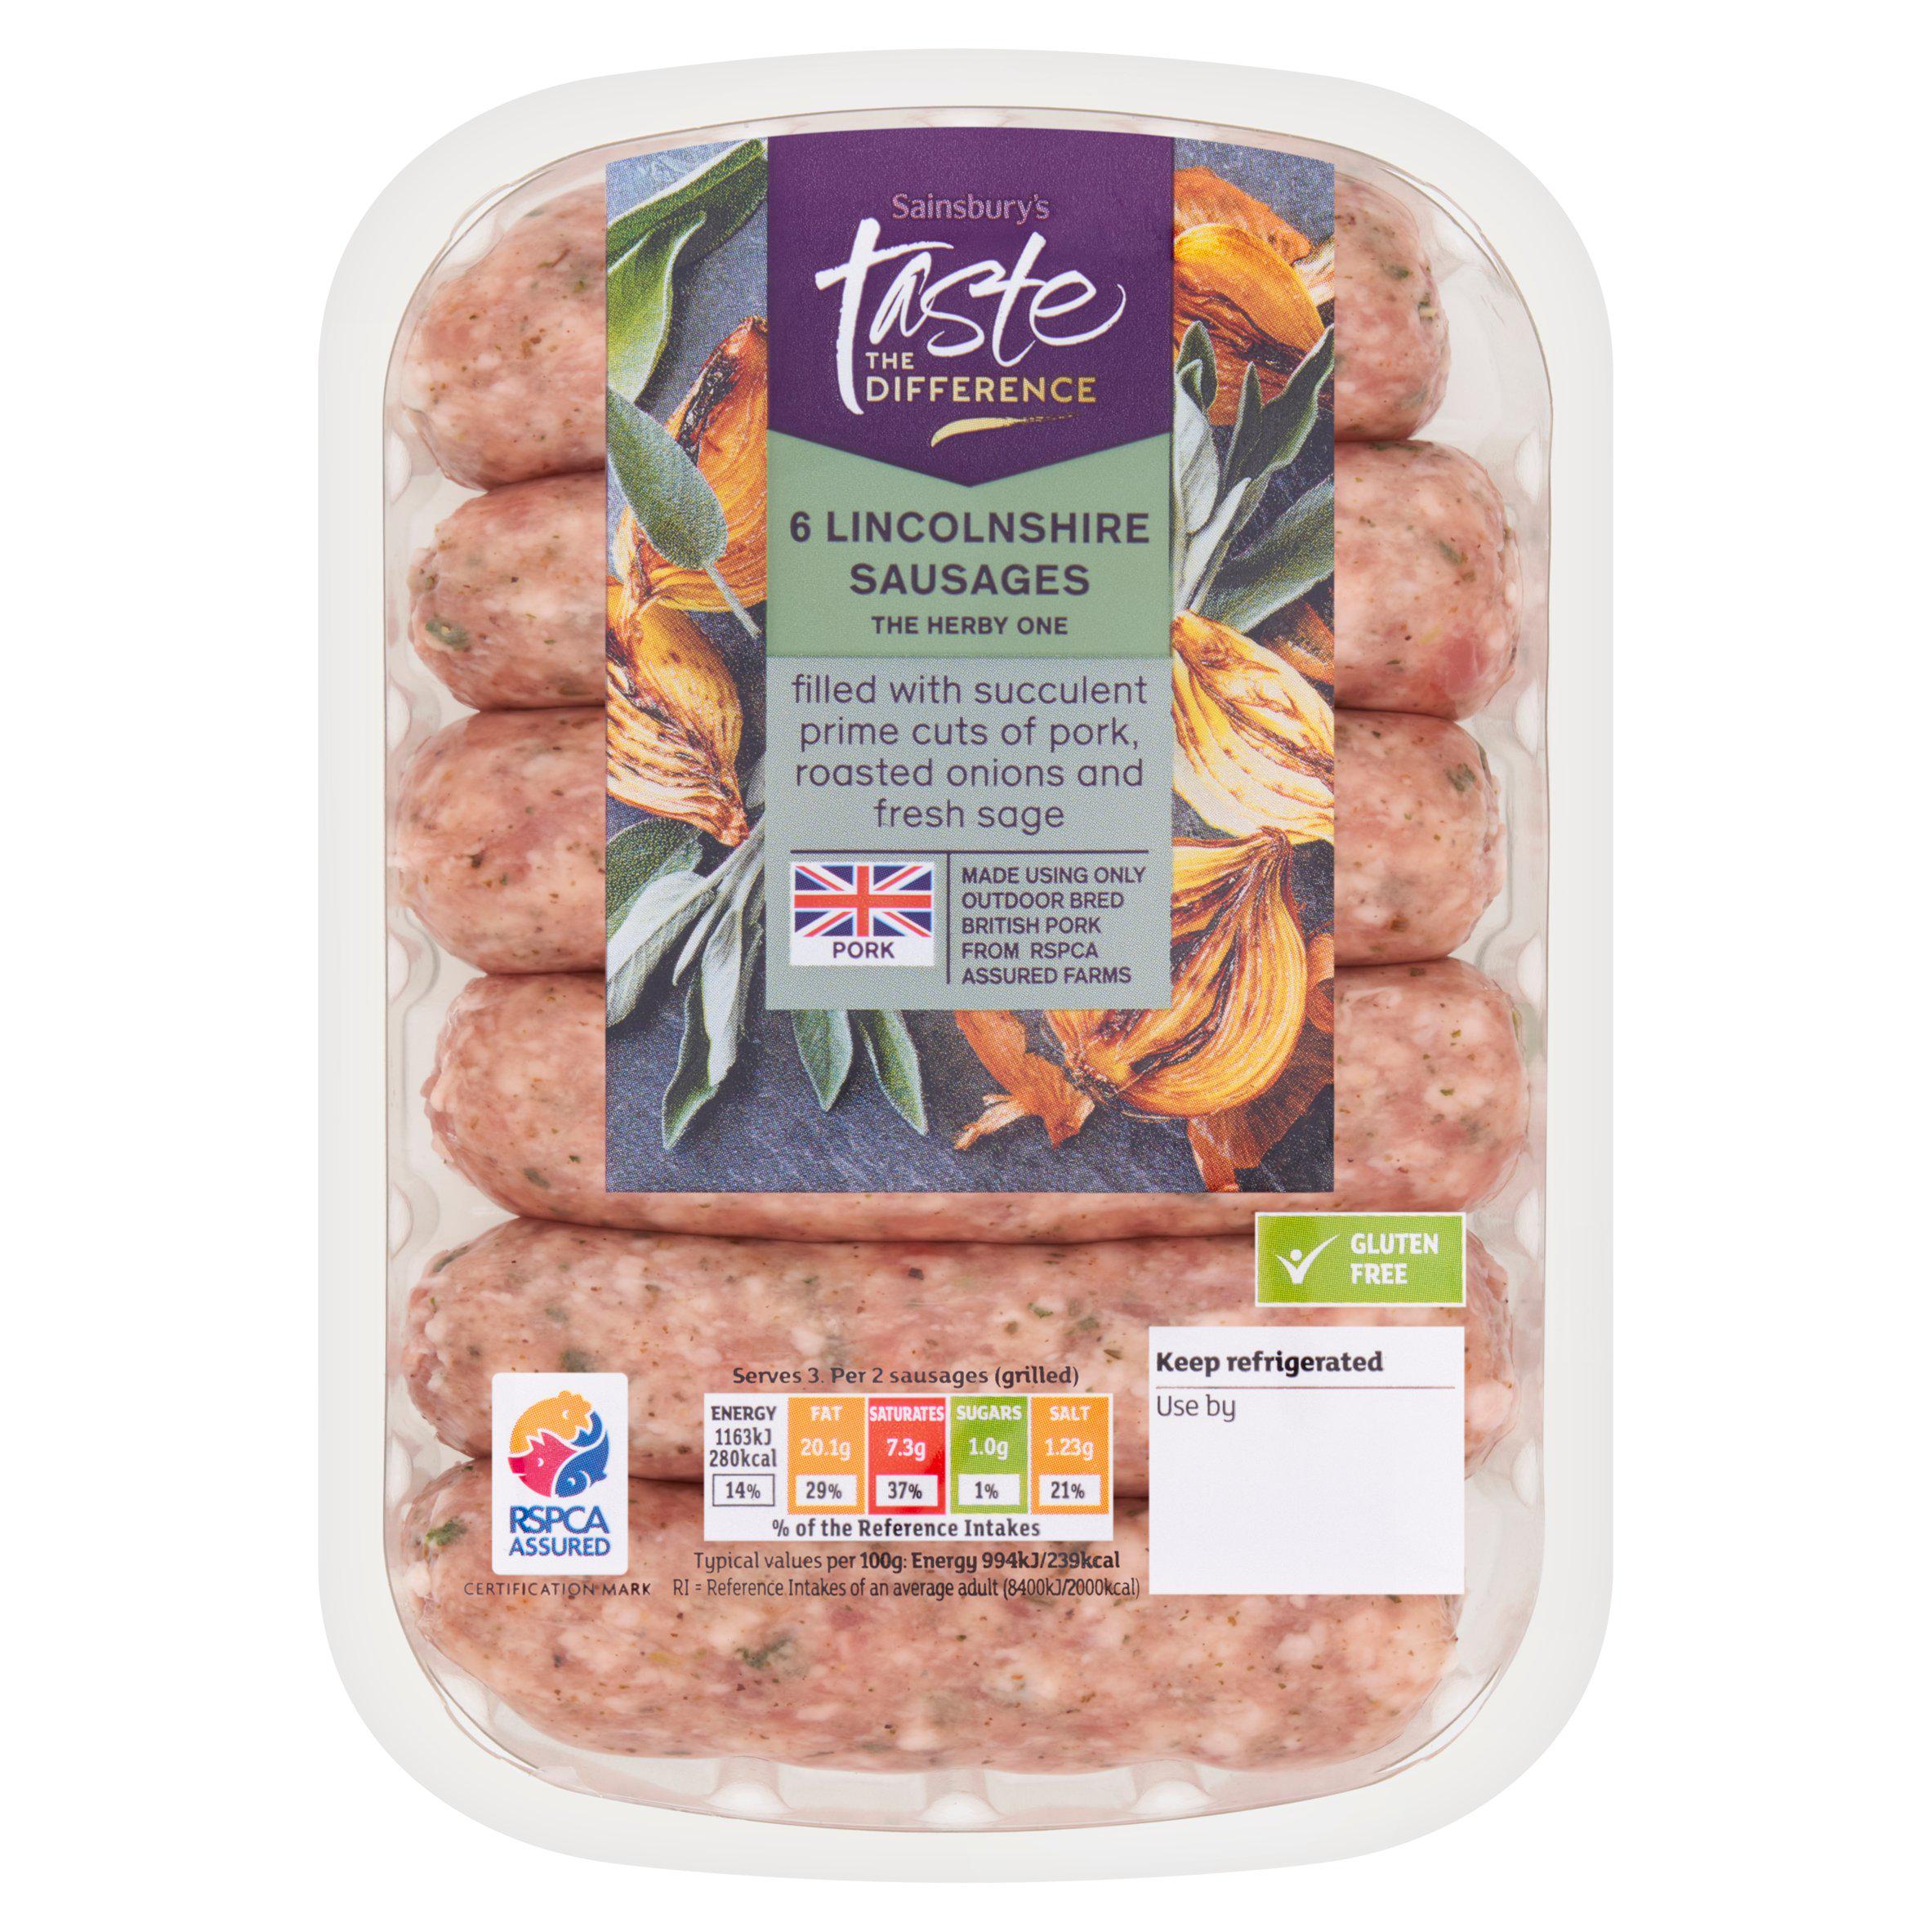 Sainsbury's Lincolnshire British Pork Sausages, Taste the Difference x6 400g